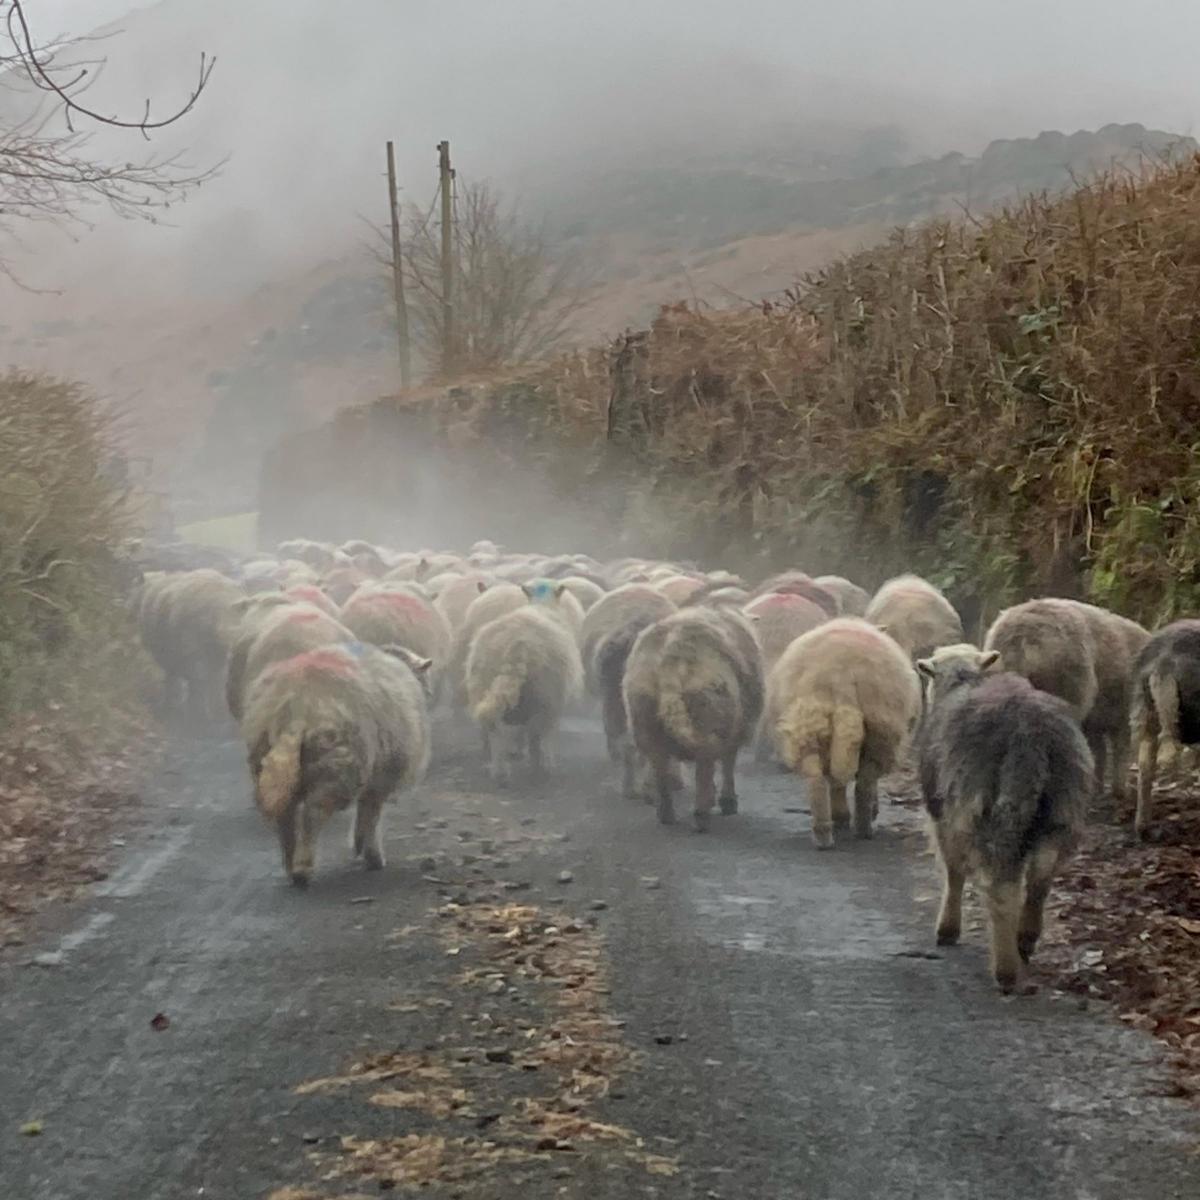 Howard Procter - Taking the Herdwicks back to the hills after scanning